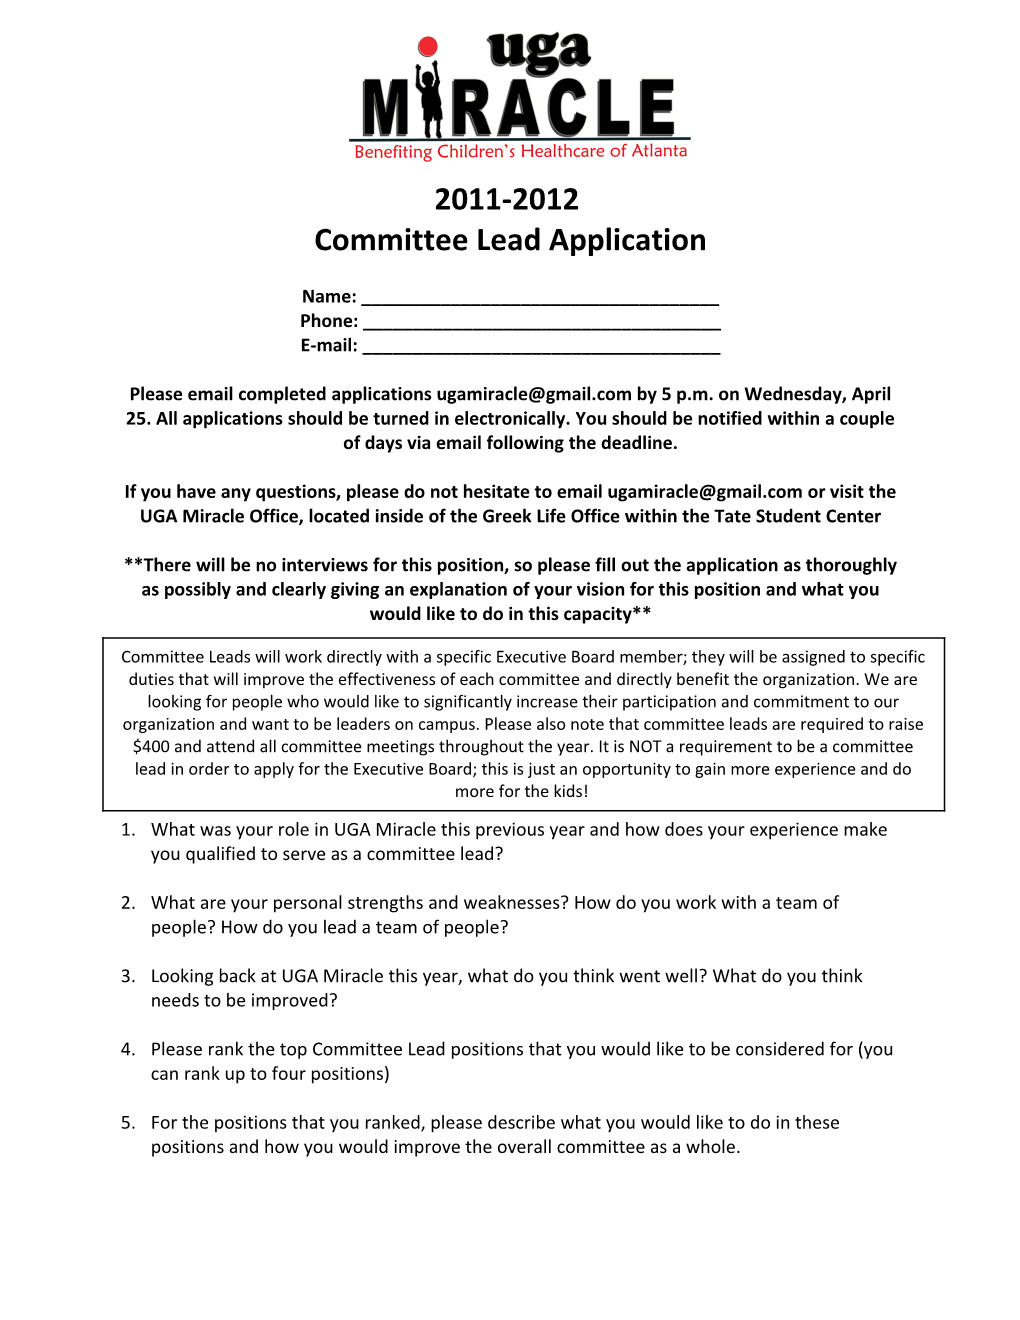 2011-2012 Committee Lead Application